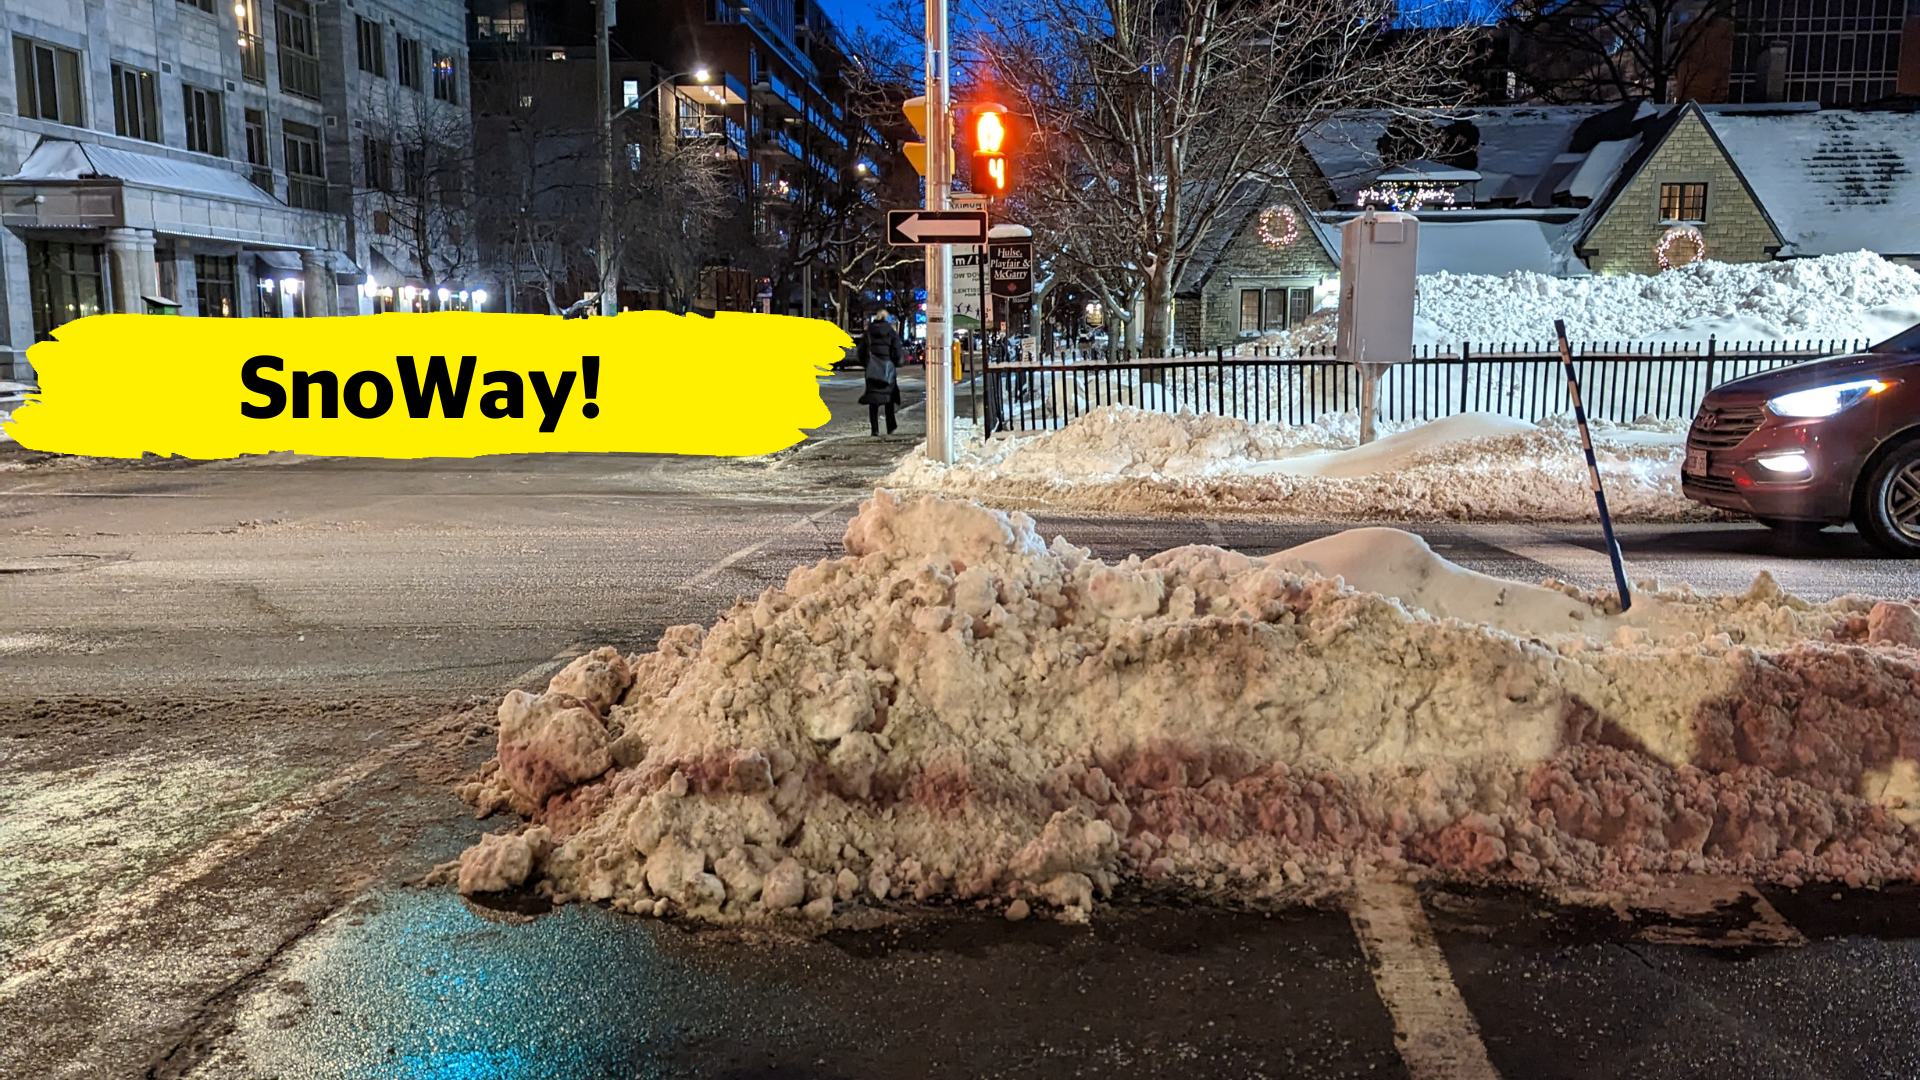 Stopped at traffic lights, a pile of improperly cleared snow blocks half of the pedestrian crosswalk. In the centre of the image, there is a yellow banner overlay with the text “SnoWay!”